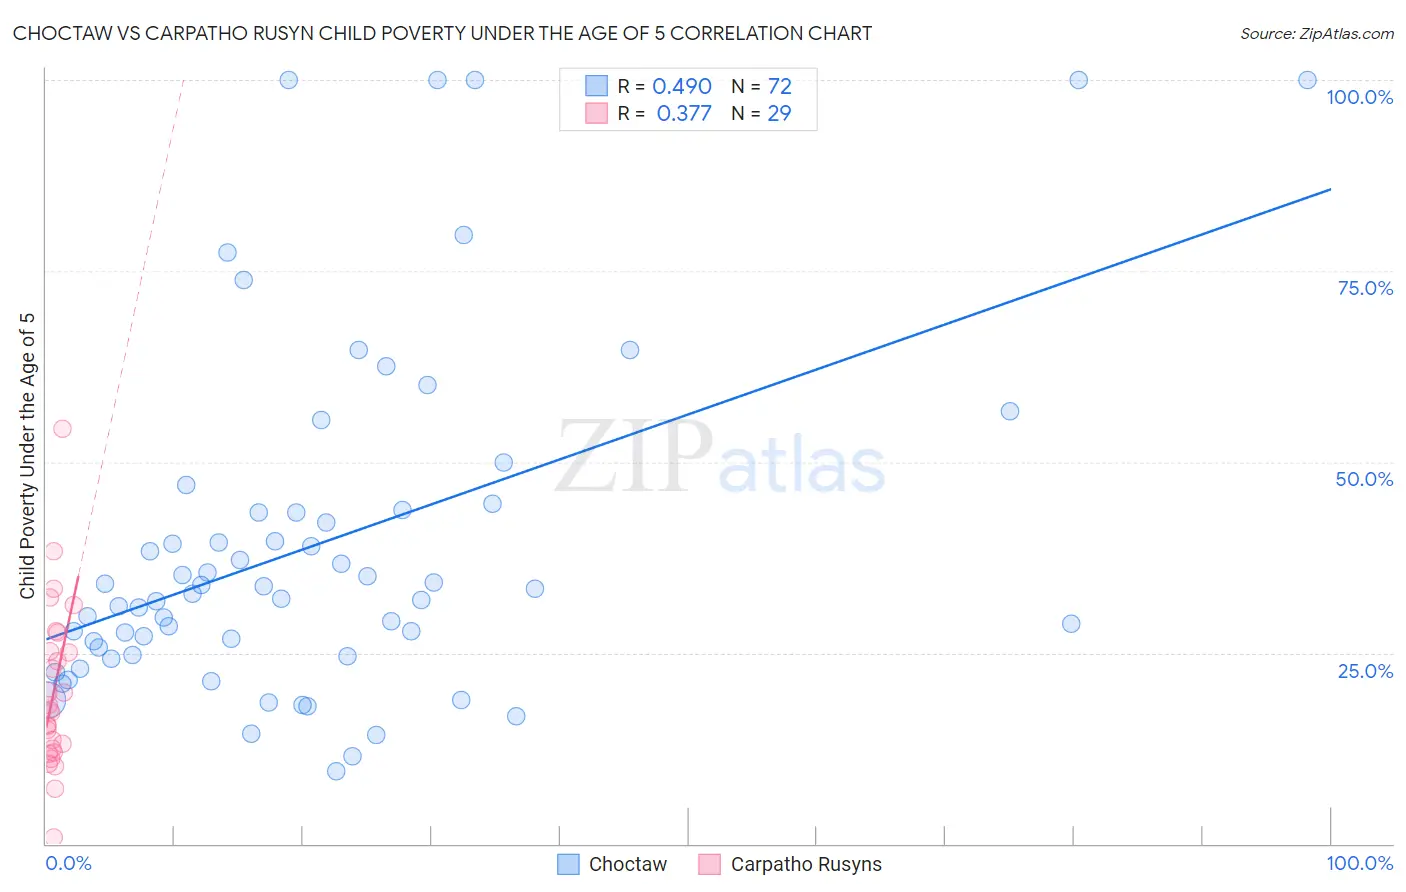 Choctaw vs Carpatho Rusyn Child Poverty Under the Age of 5